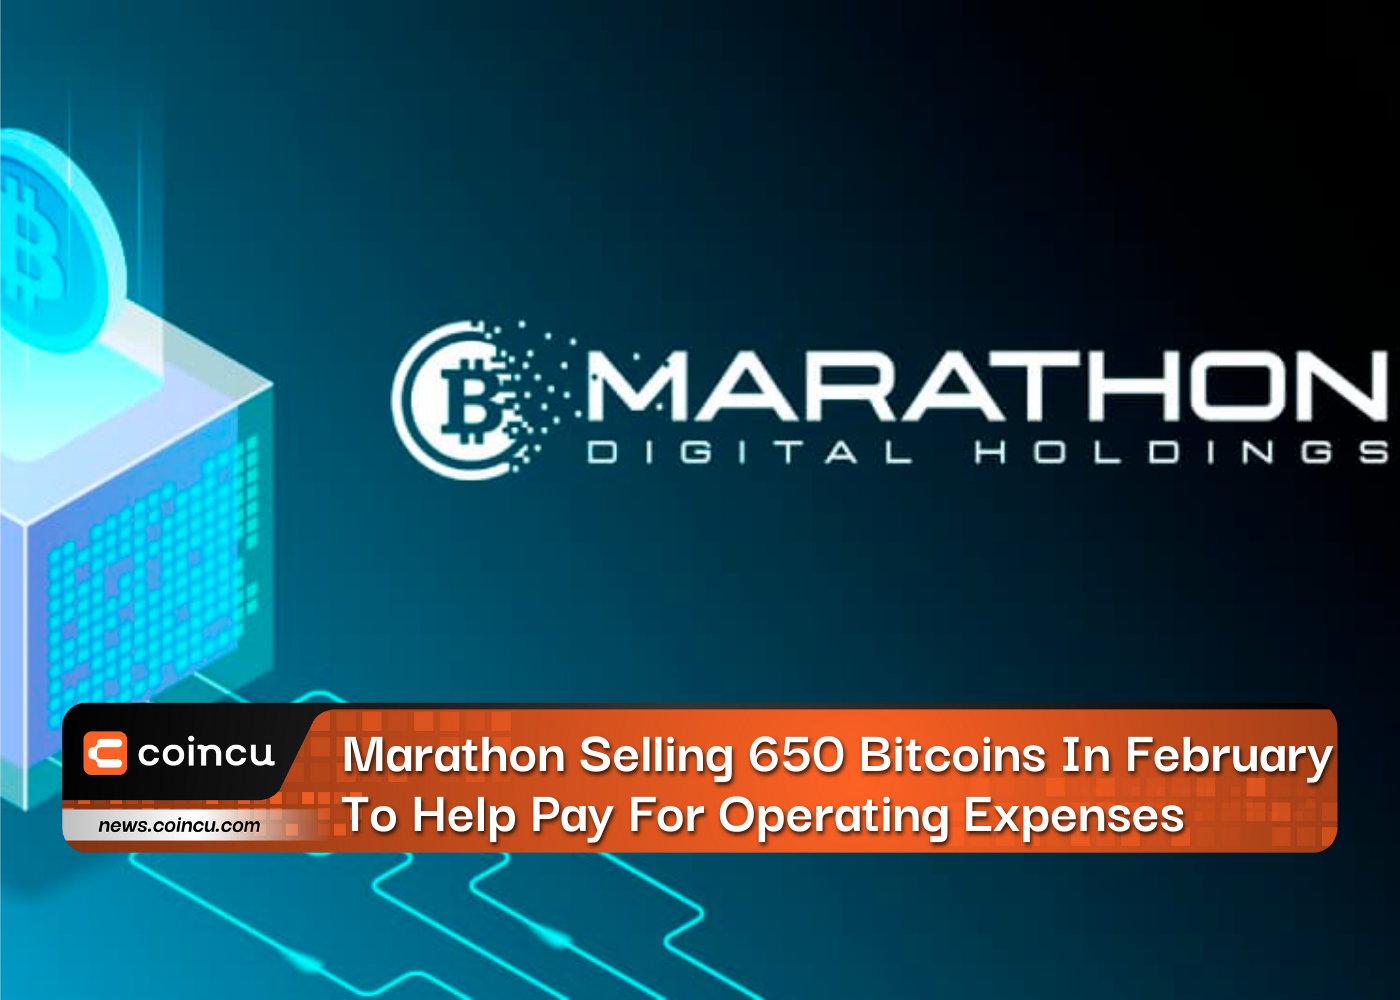 Marathon Selling 650 Bitcoins In February To Help Pay For Operating Expenses